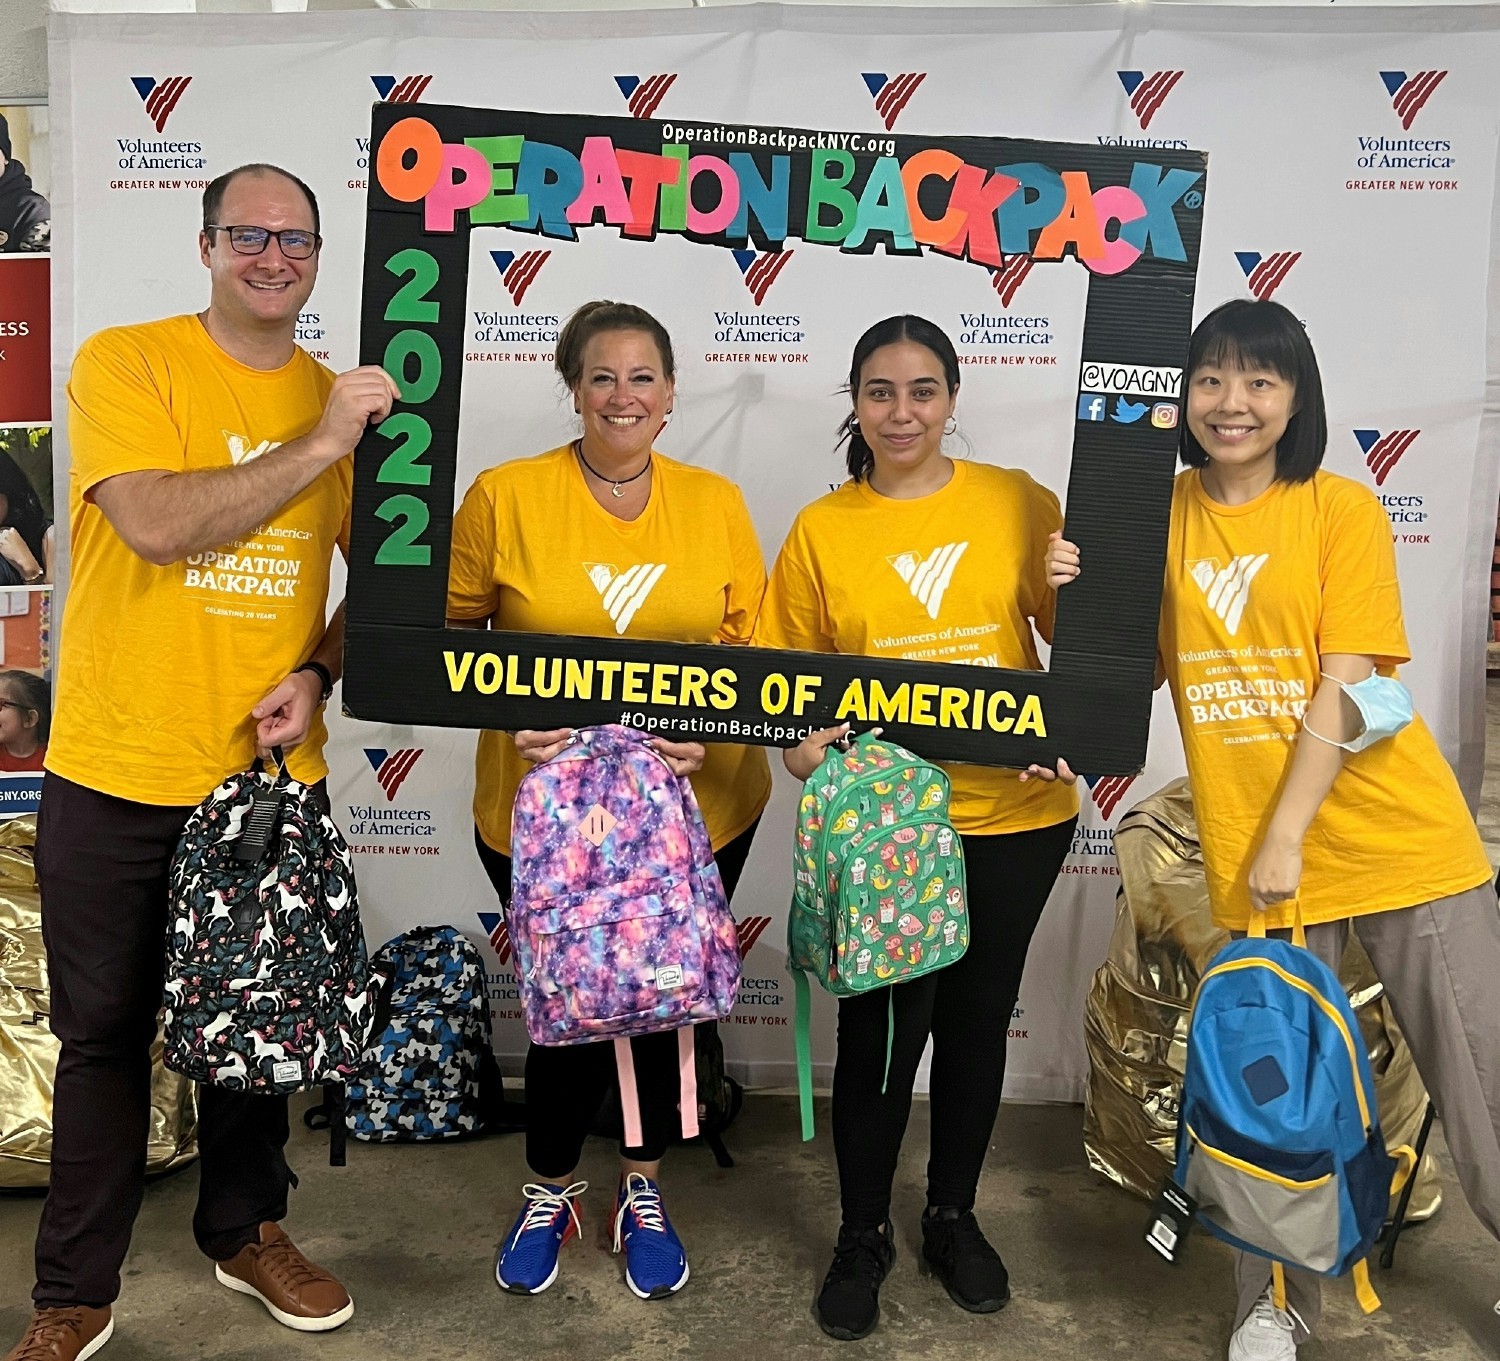 Our 2022 Operation Backpack volunteers prepared over 250 school kits supporting the academic success of students in need